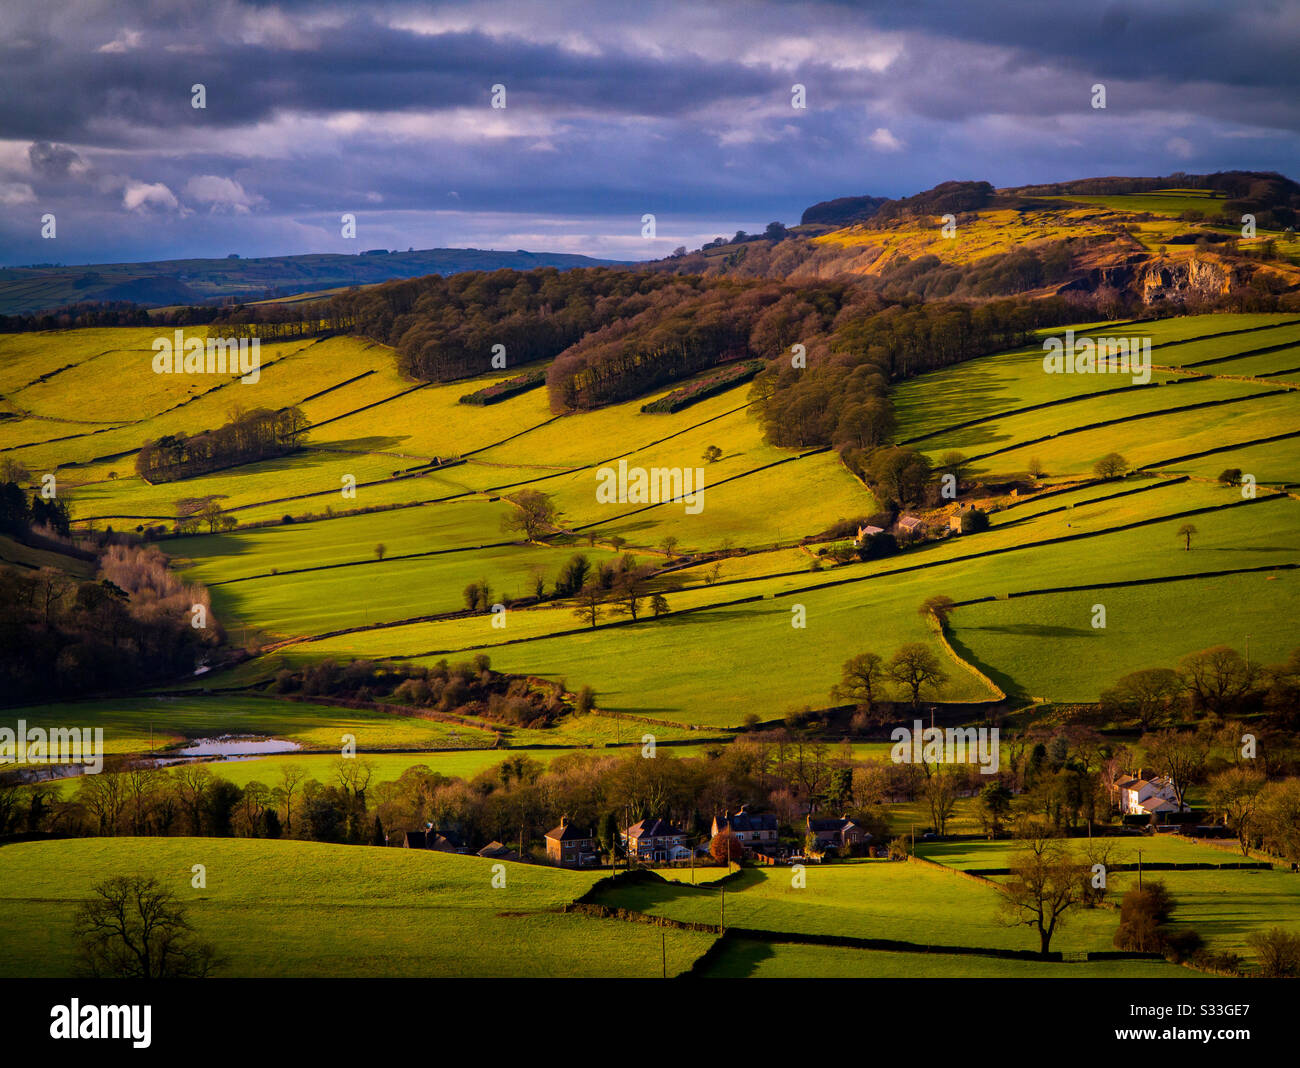 View looking over the Peak District landscape near Curbar in Derbyshire England UK. Stock Photo